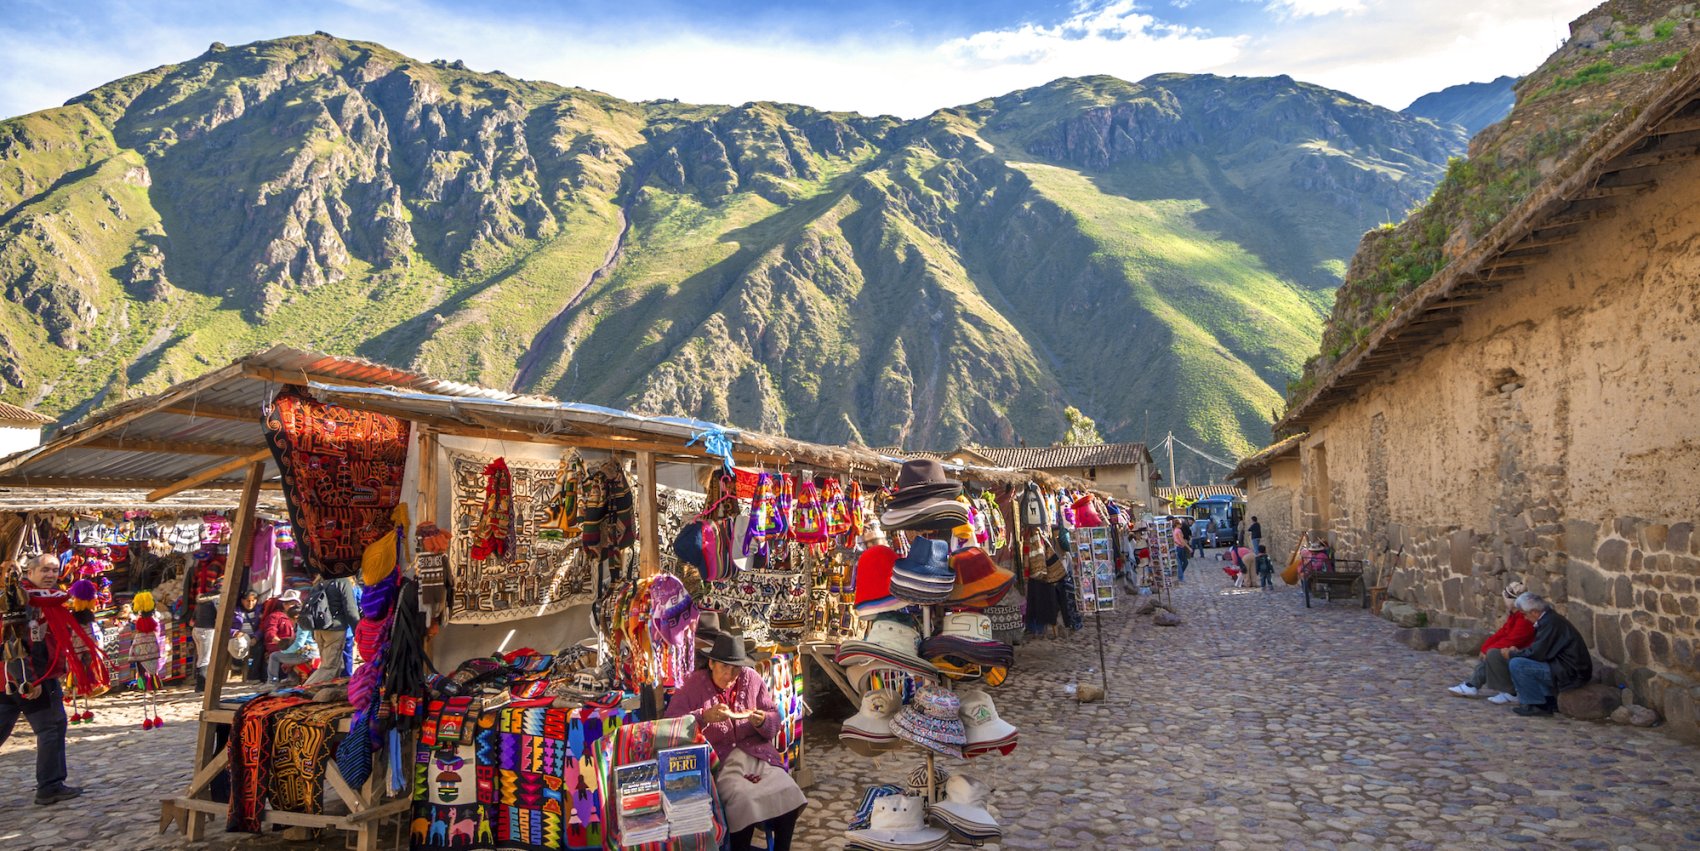 A colorful craft market in Peru with grassy mountains in the background on a sunny day.